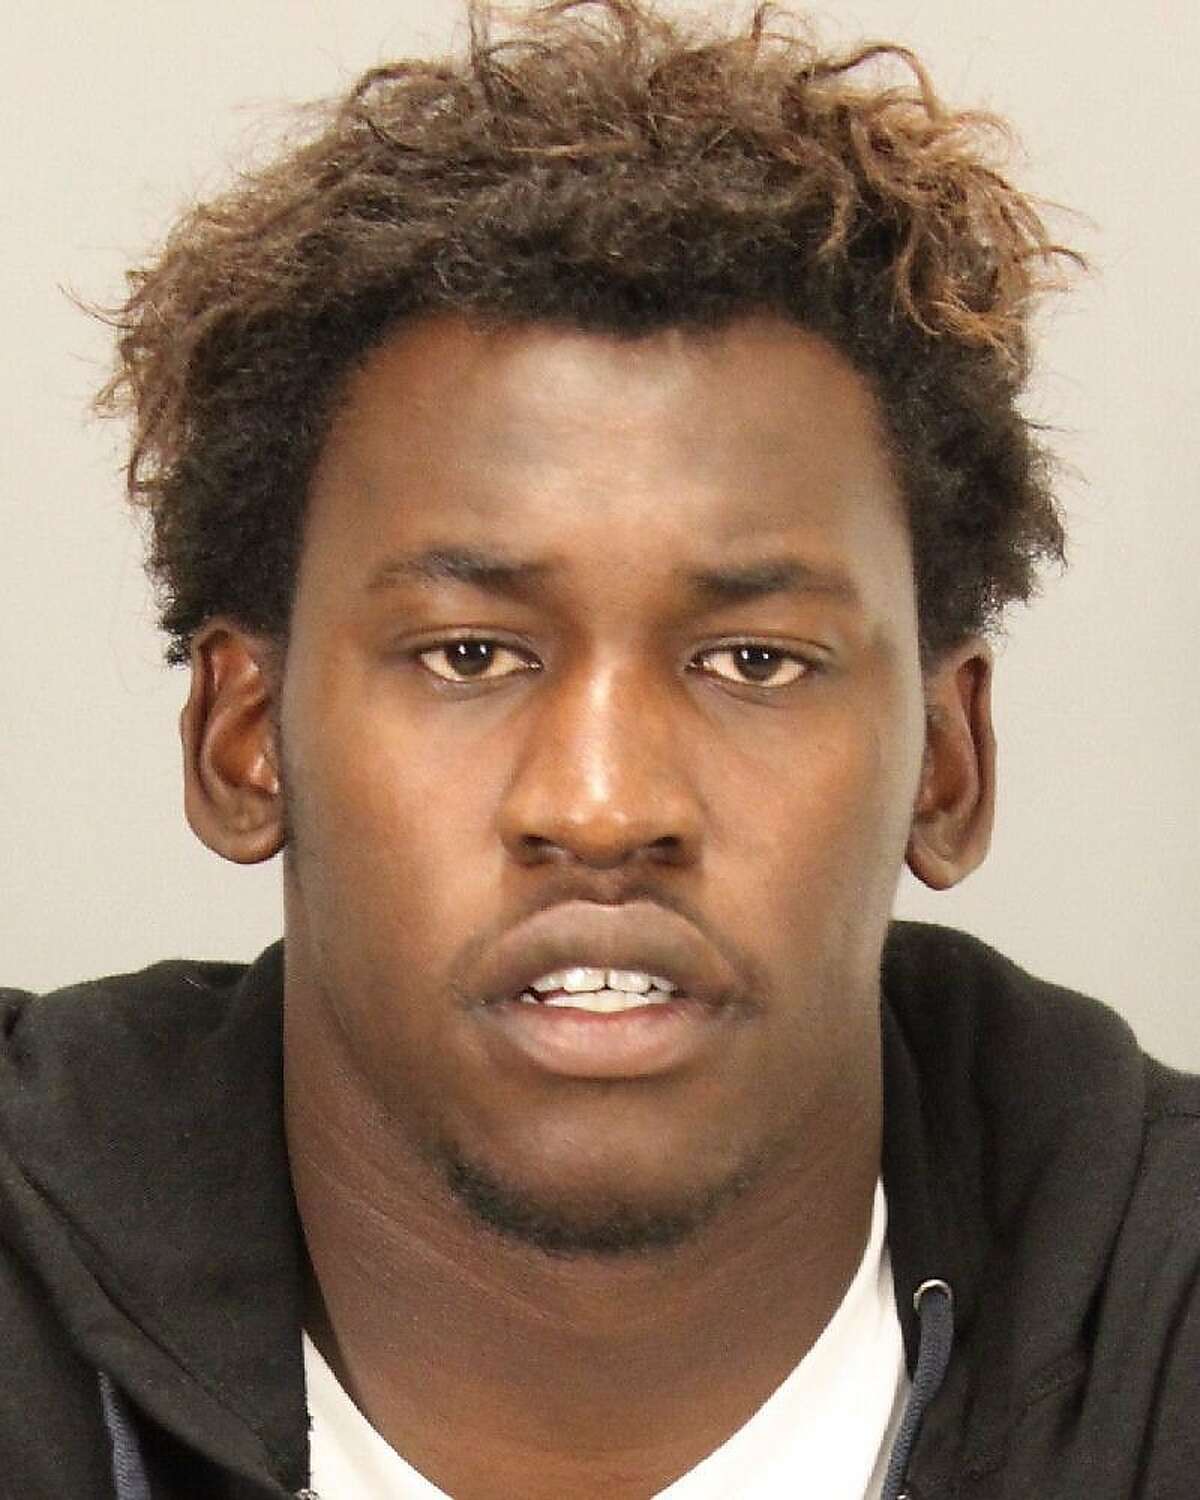 Aldon Smith is seen in this photo provided by the San Jose Police Department after an arrest while he was a member of the 49ers.